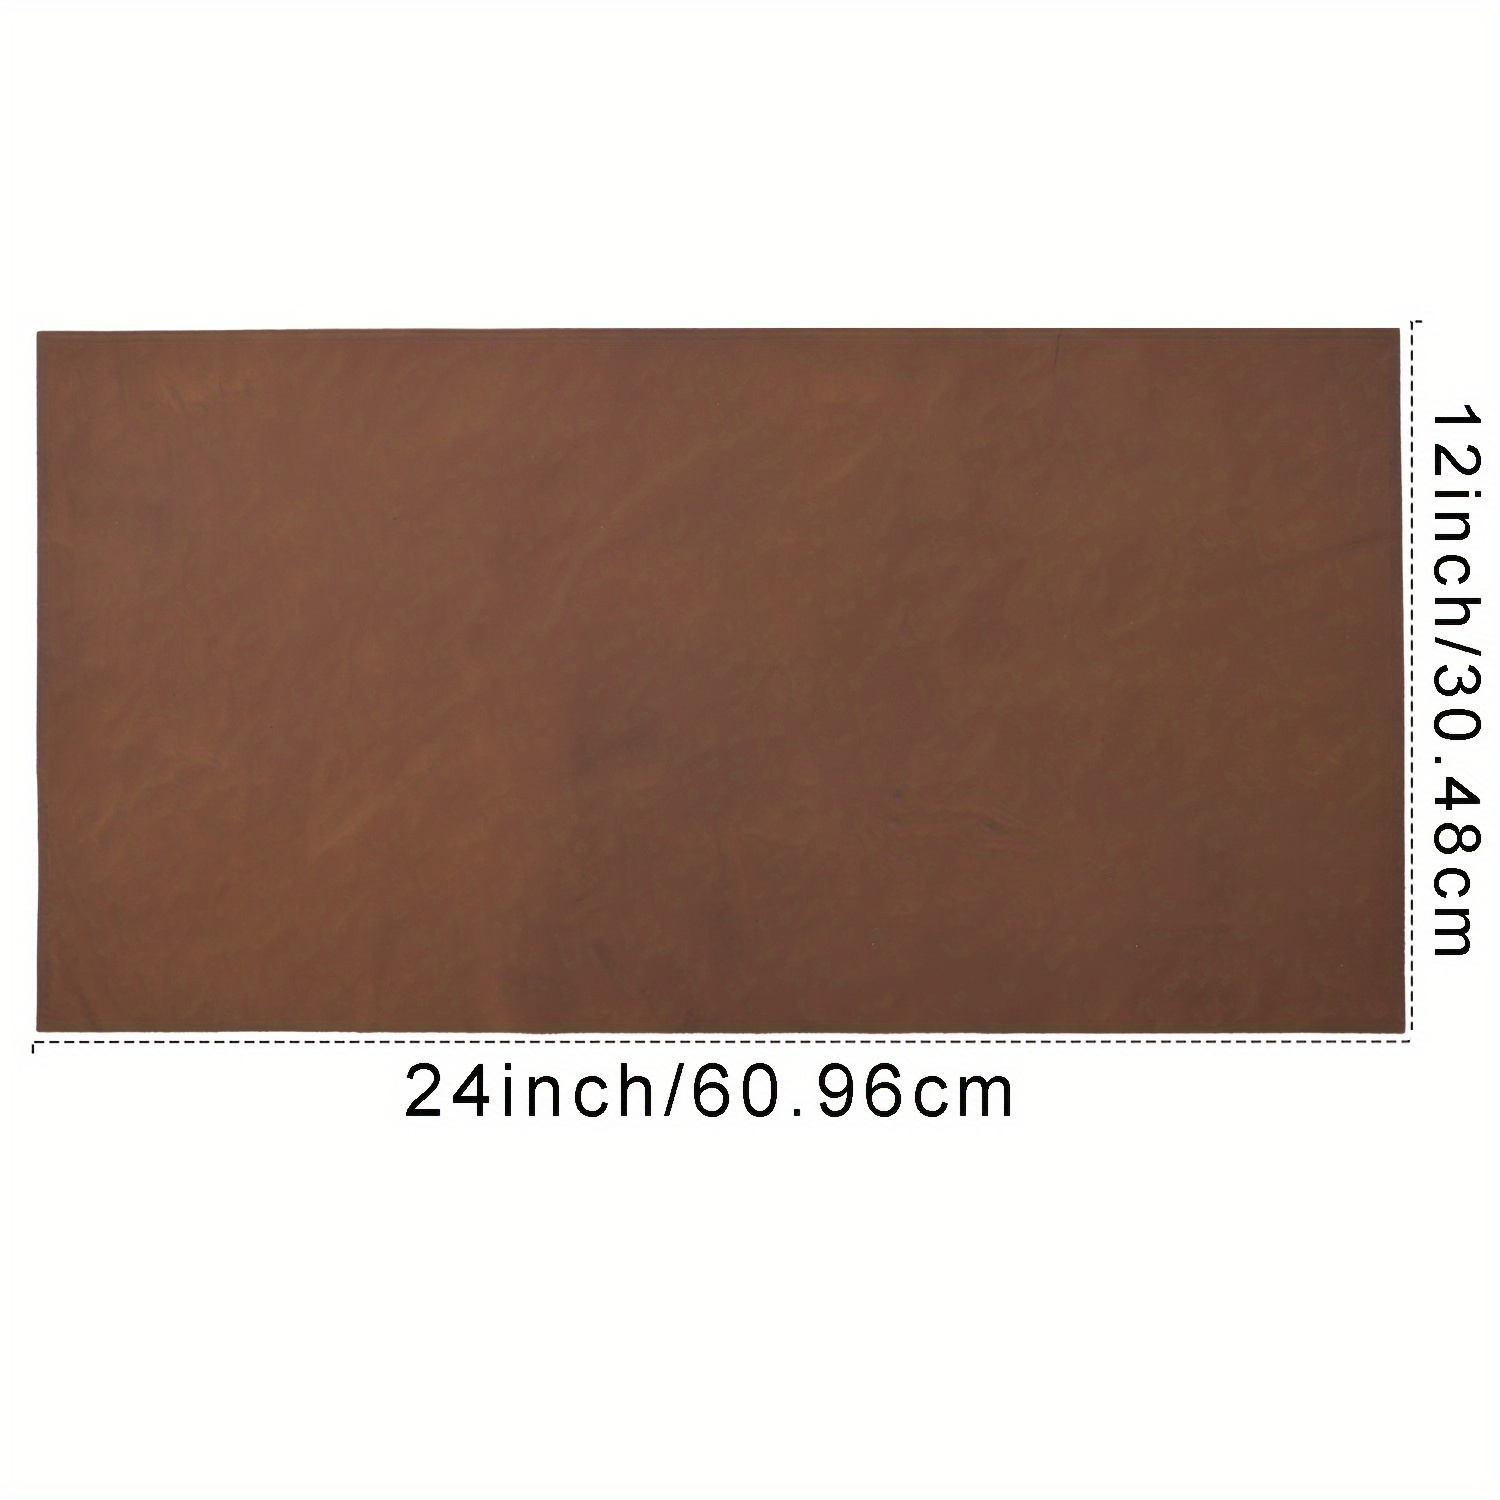  Genuine Leather Sheets for Crafts, Tooling Leather